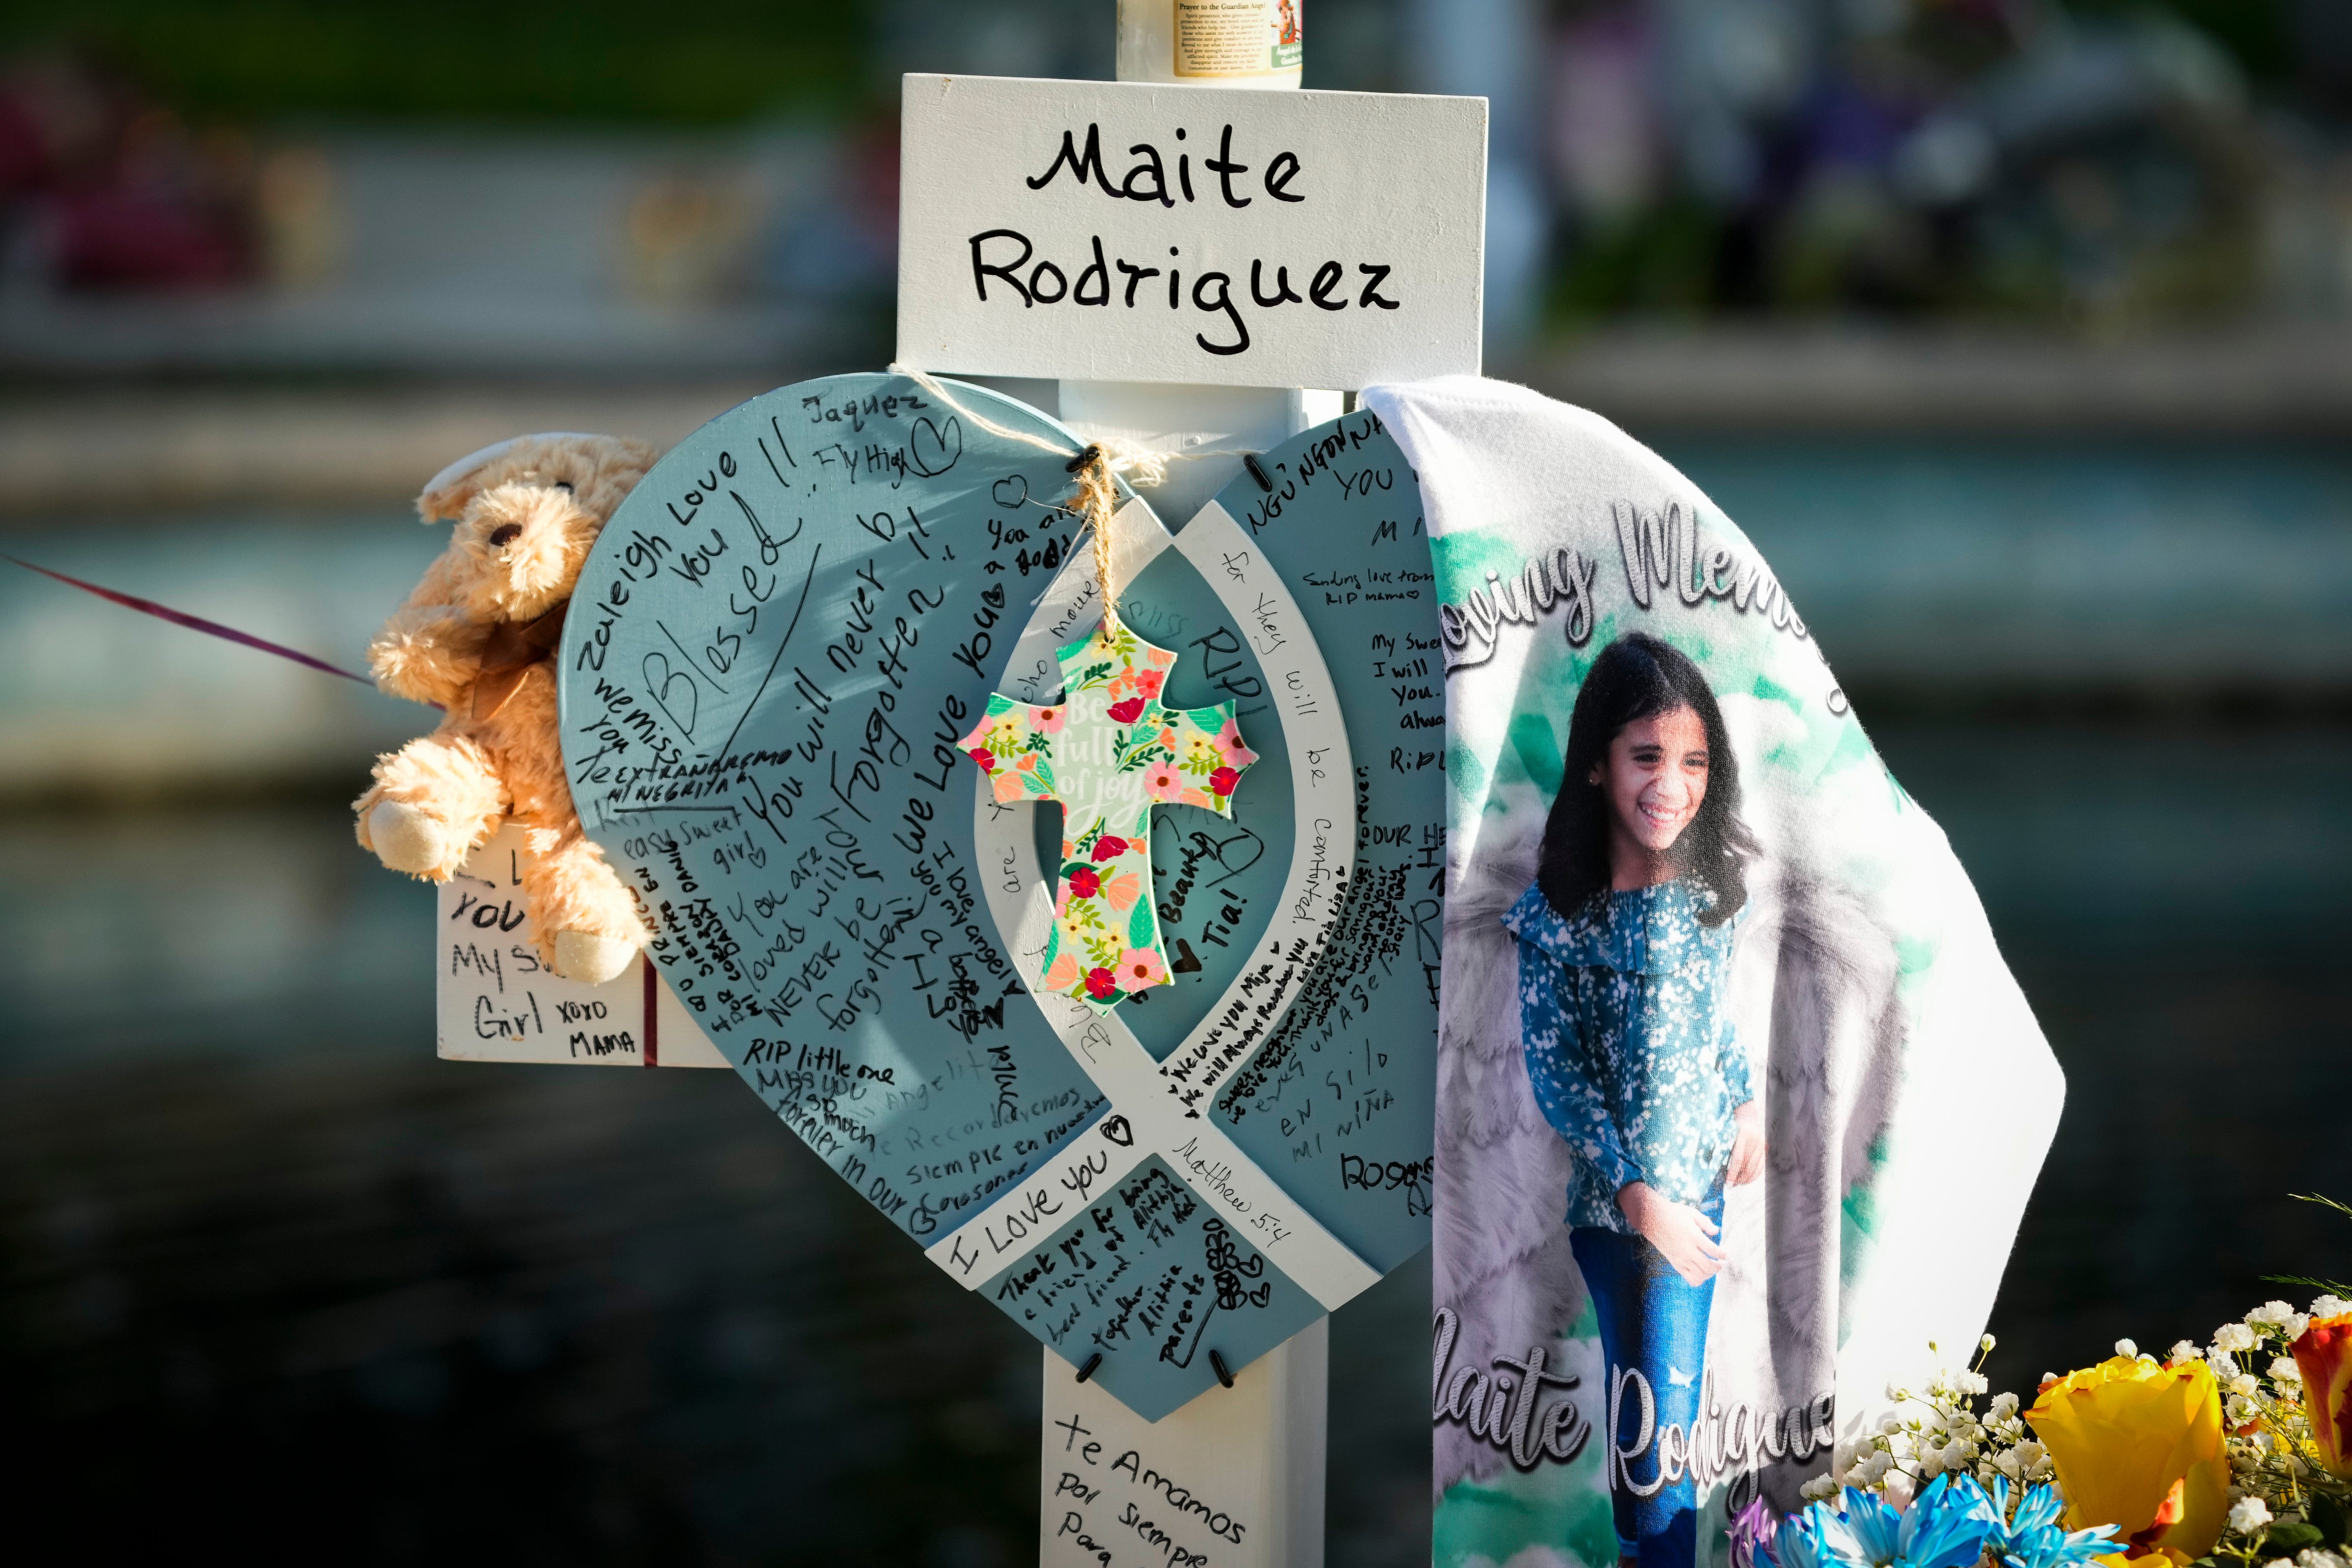 A memorial cross for Maite Rodriguez, one of the 19 children killed at Robb Elementary School, is decorated with mementos and personal notes in Uvalde's town square.